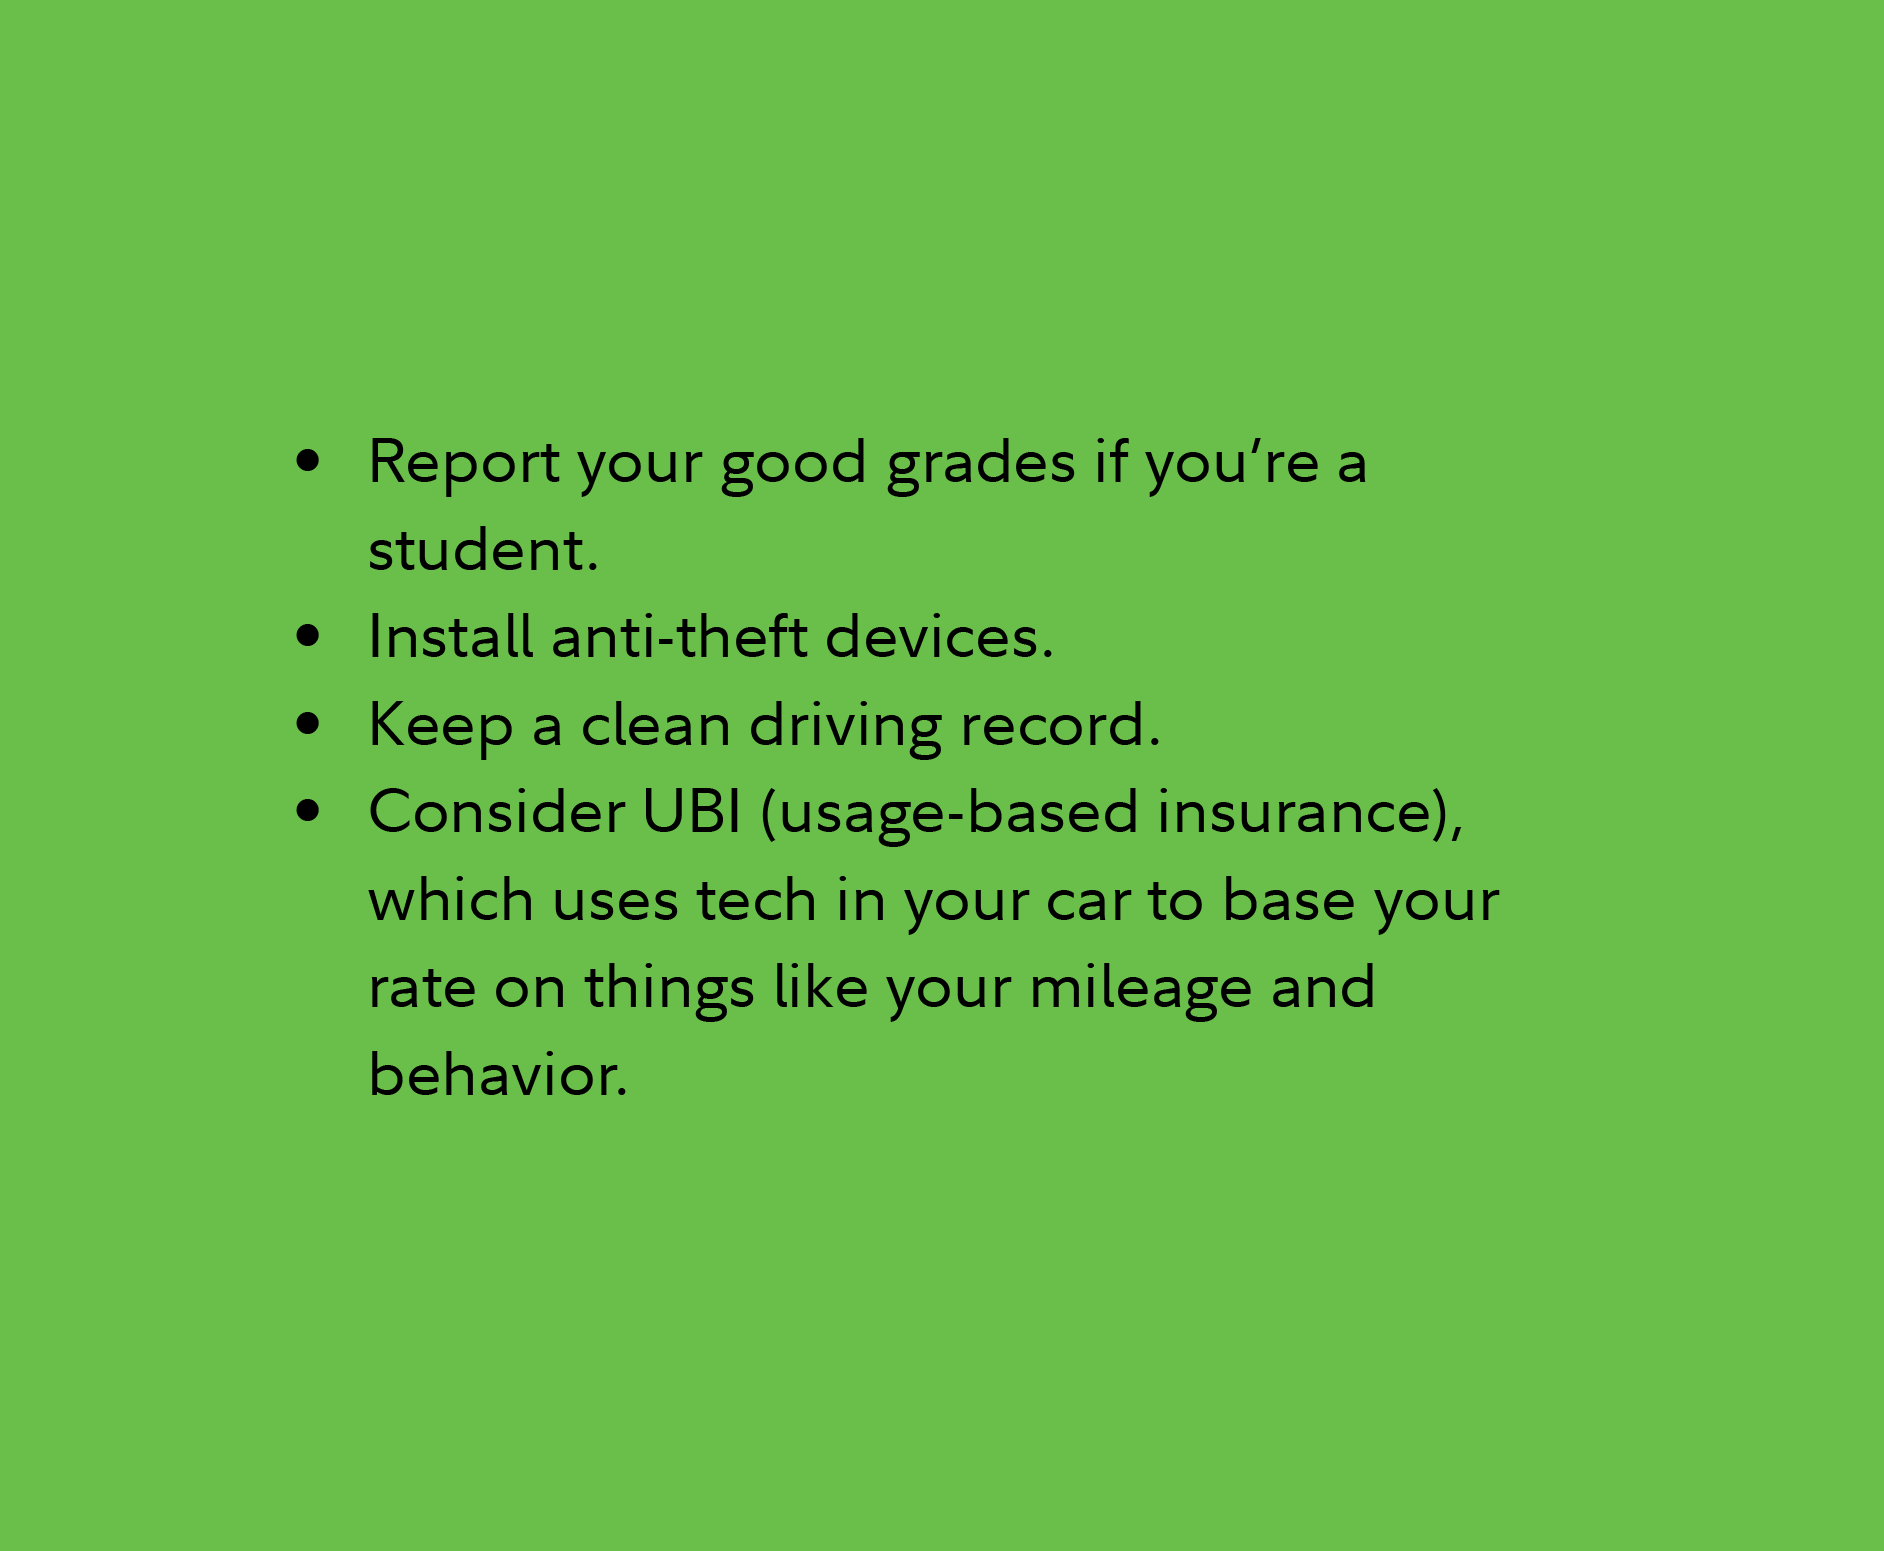 Report your good grades if you’re a student. Install anti-theft devices. Keep a clean driving record. Consider UBI (usage-based insurance), which uses tech in your car to base your rate on things like your mileage and behavior.